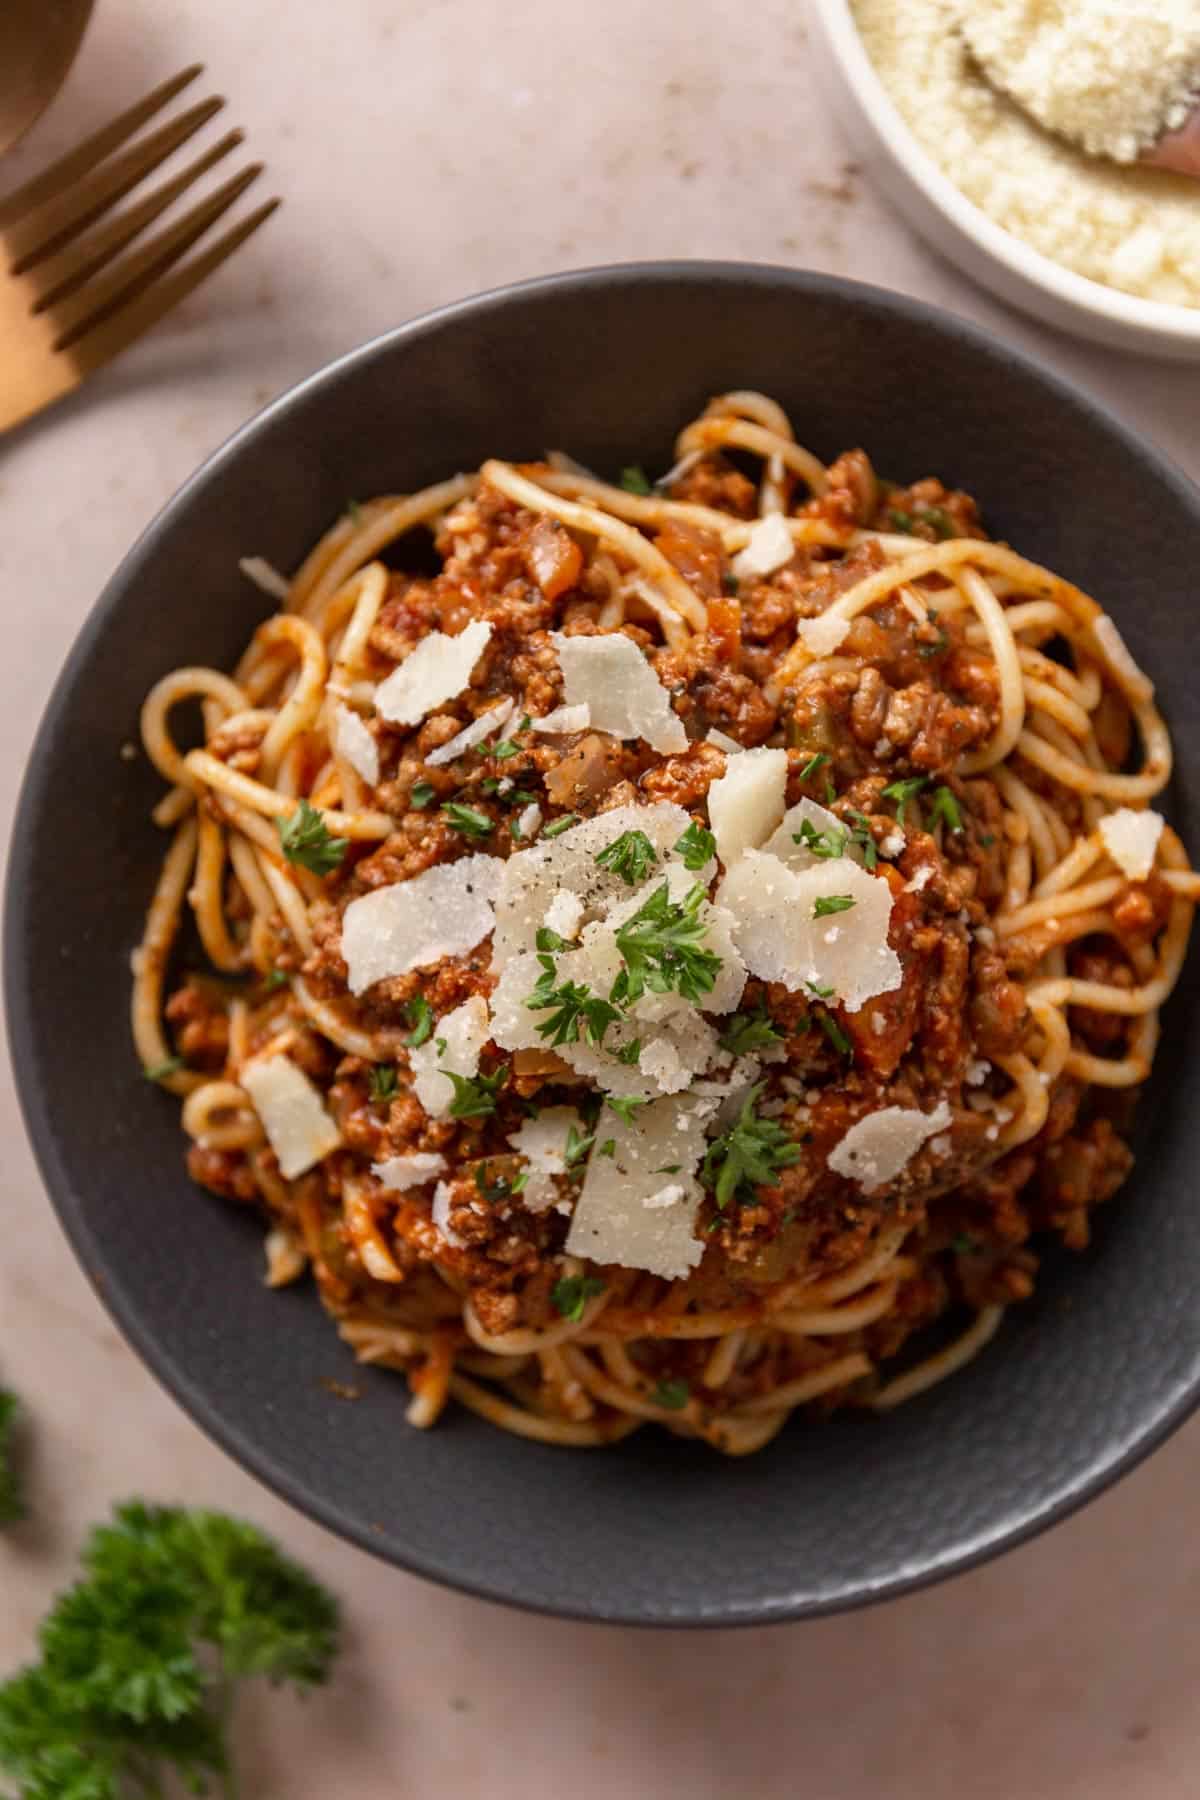 spaghetti served with bolognese sauce and parmesan